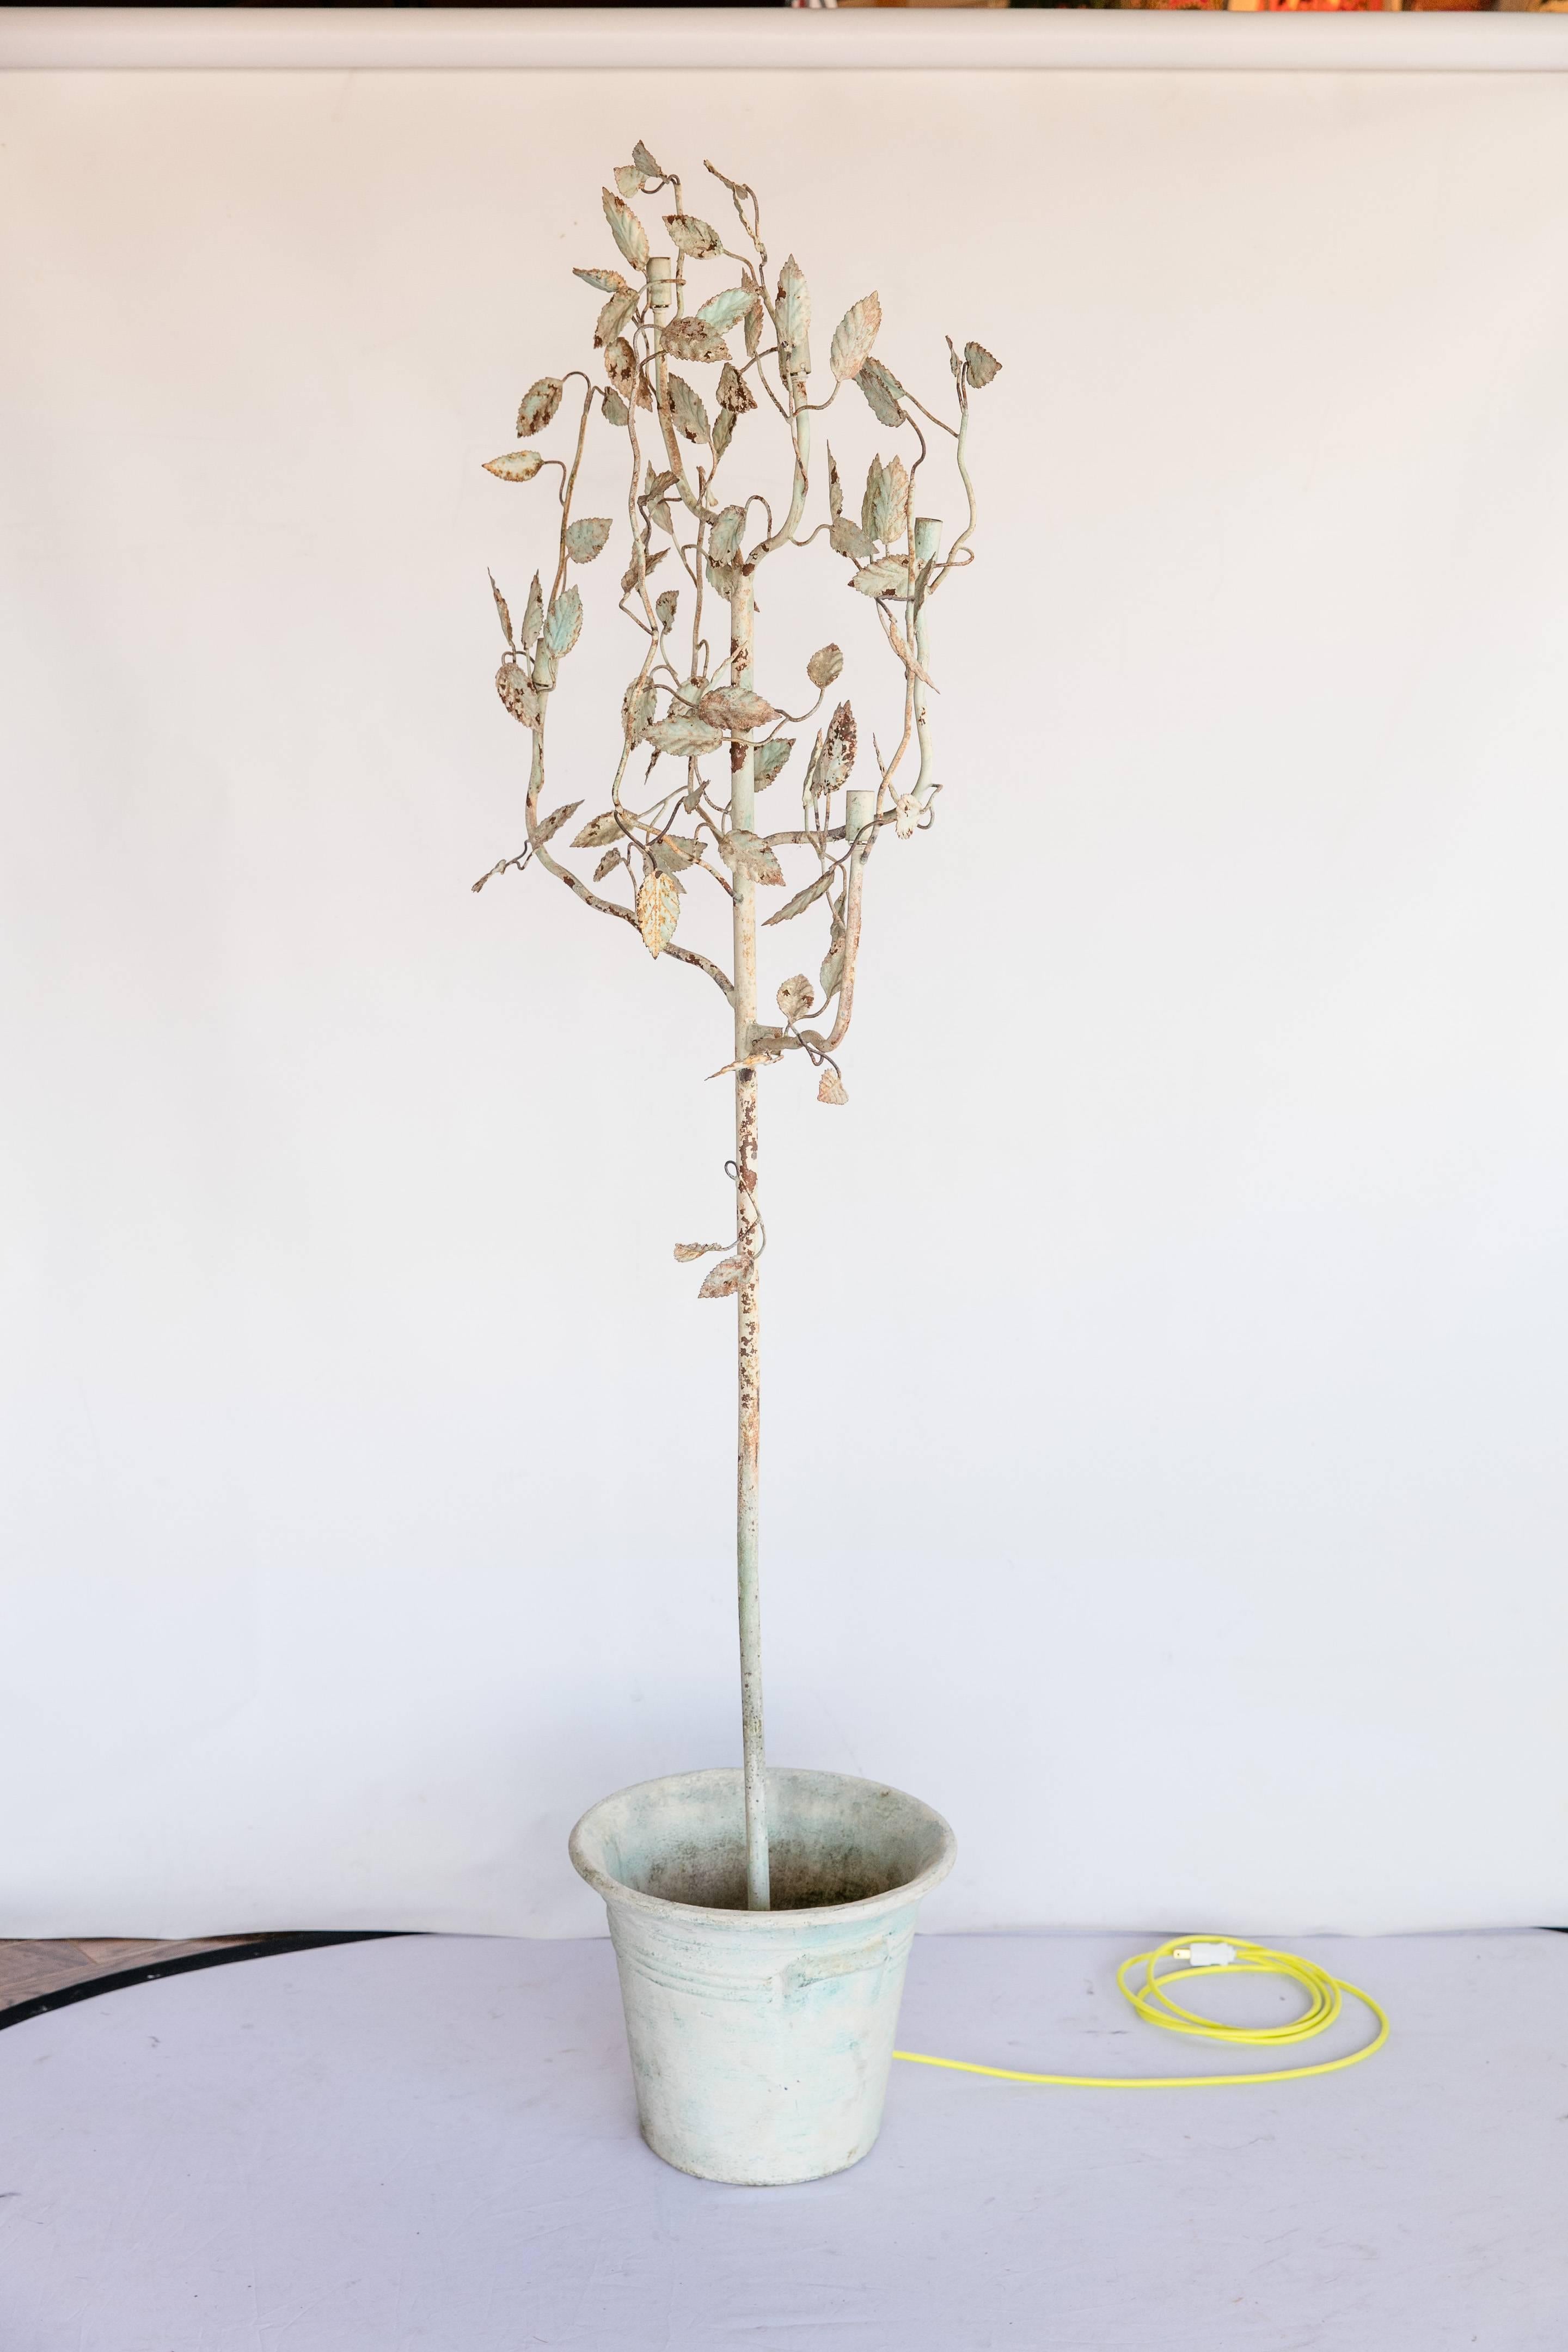 A 1950s rustic metal tree floor lamp. Cream-and-light green coloration with distressing. Rust shows through distressing but adds to the overall rustic look of the piece. The tree is planted in a ceramic pot. The tree's branches conceal five lights.